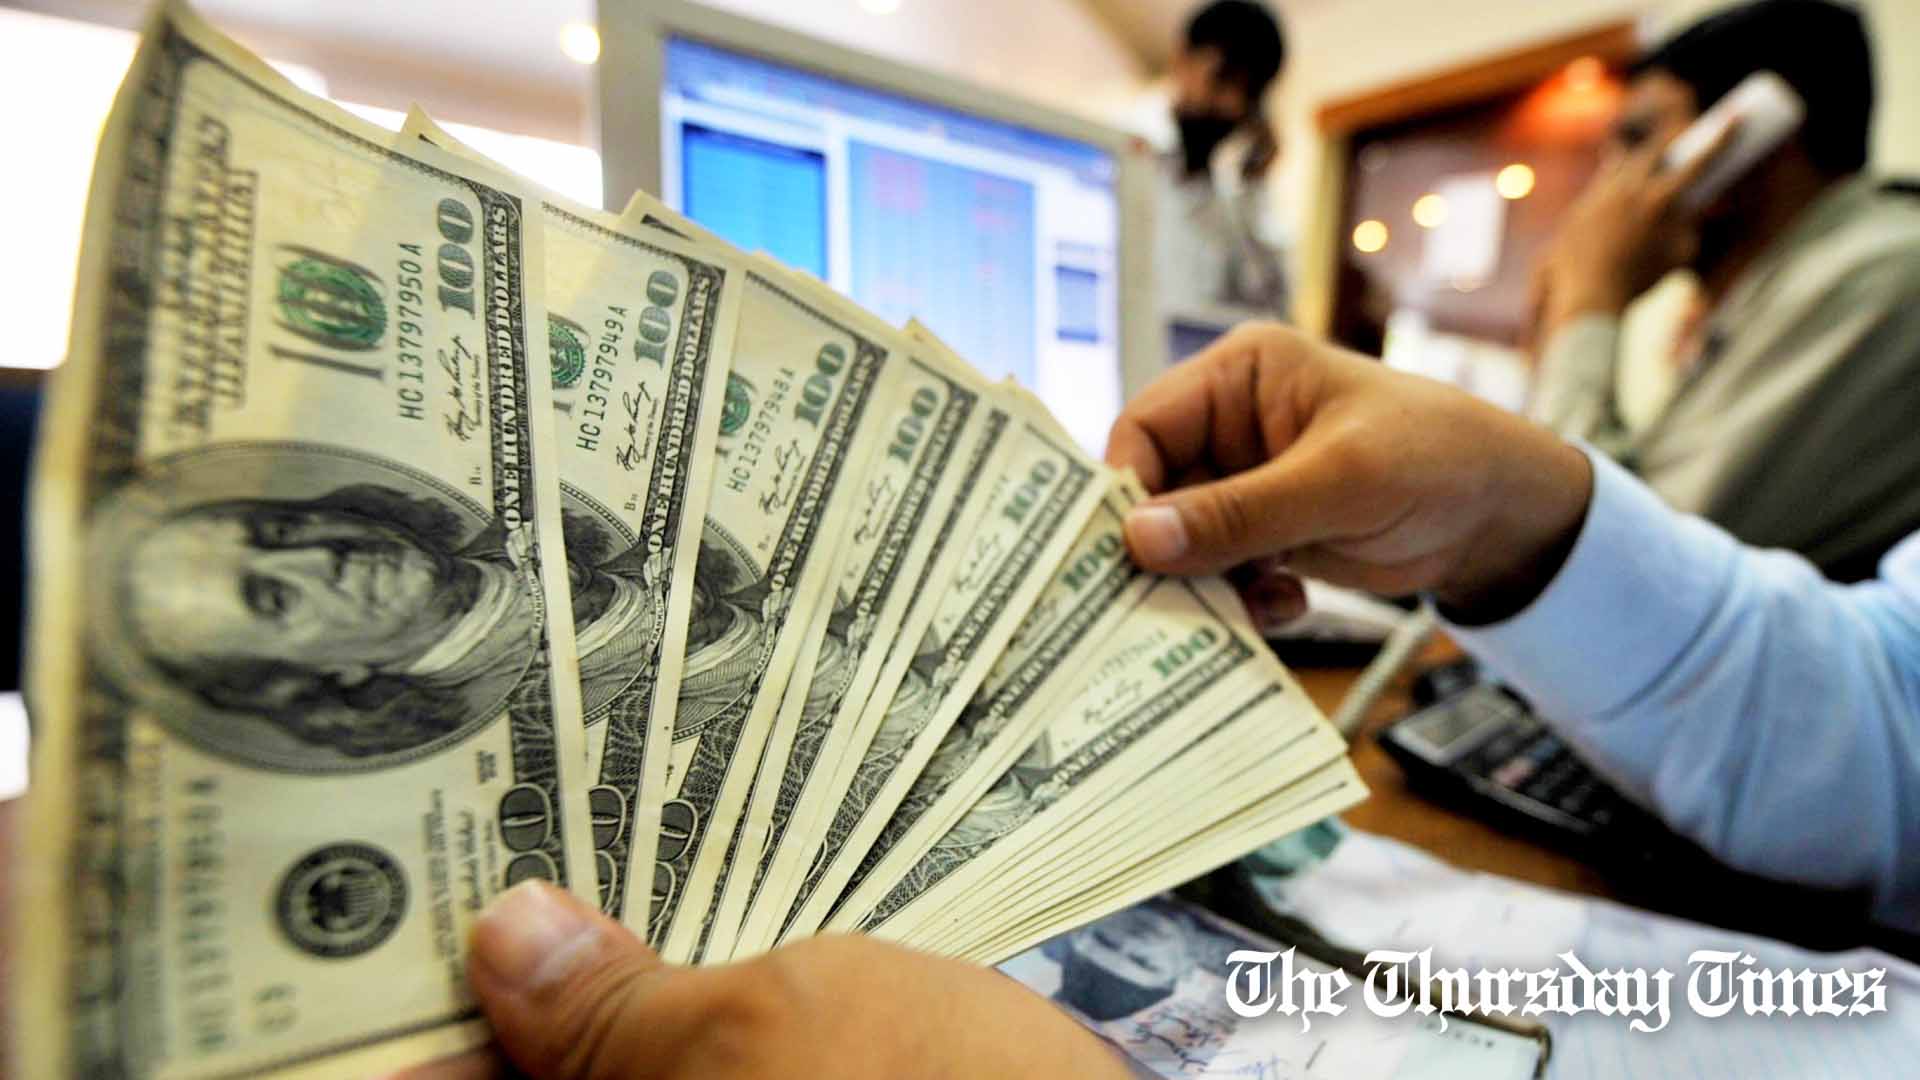 A file photo is shown of a forex dealer counting U.S. dollars at Karachi. — FILE/THE THURSDAY TIMES